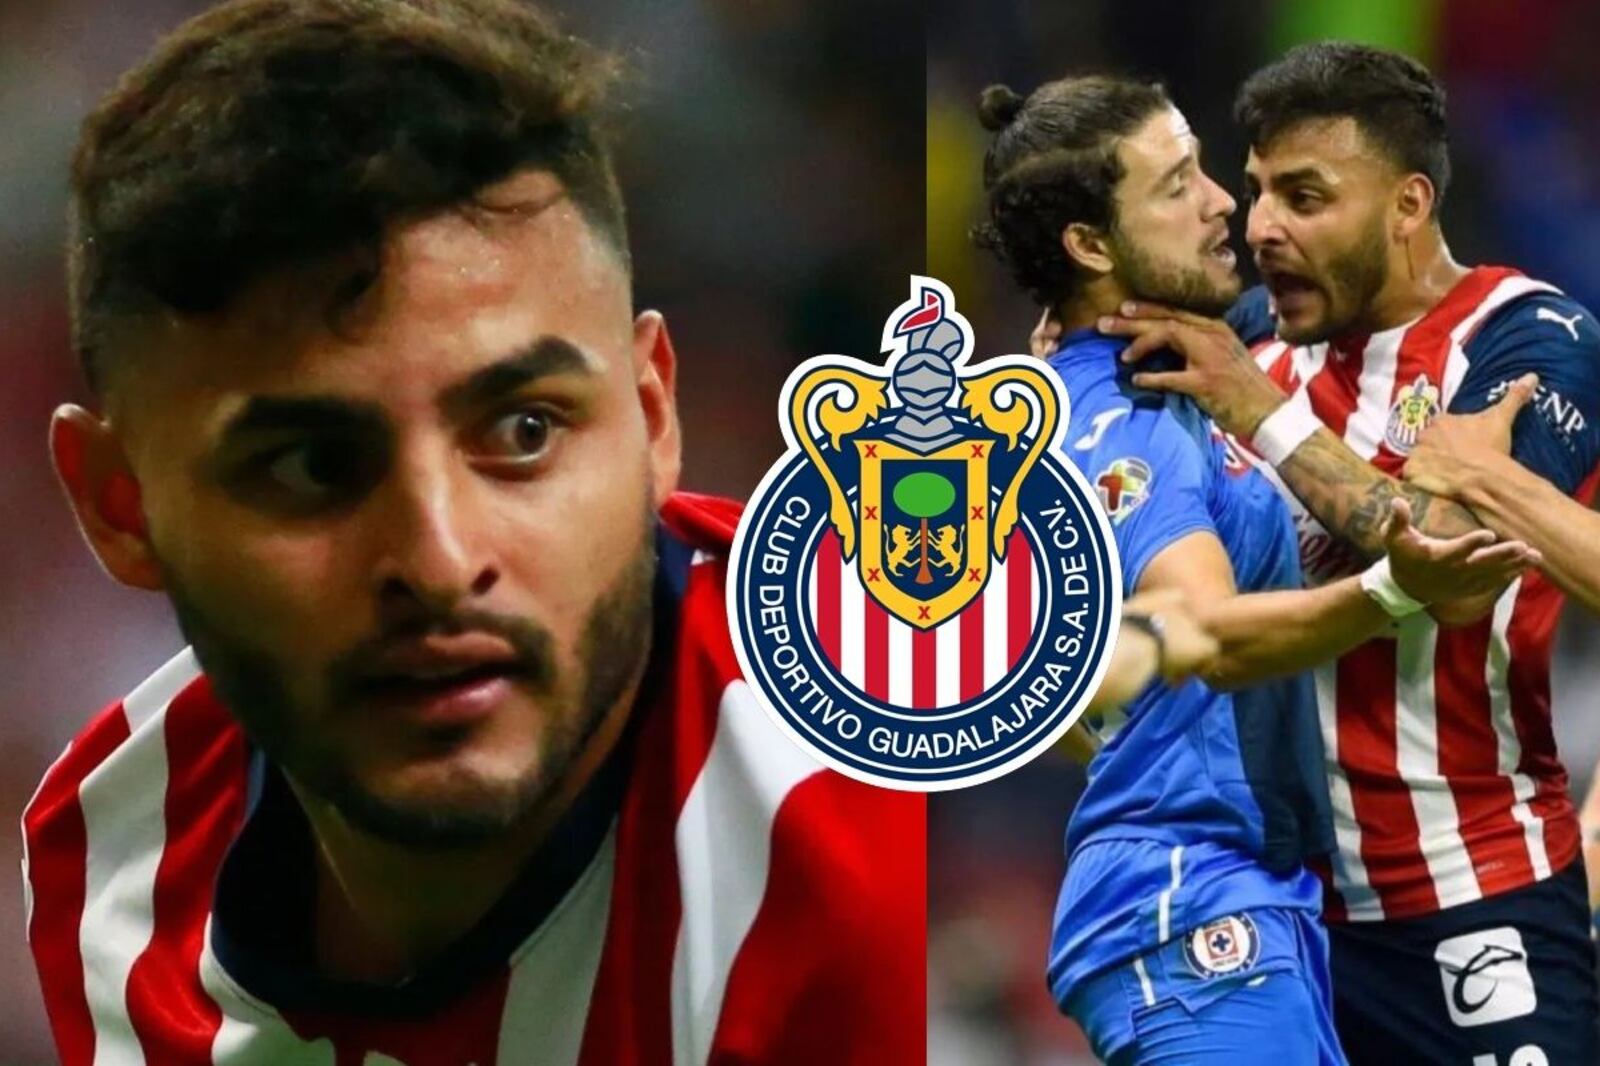 Vega and the player who scolds in Chivas against Cruz Azul